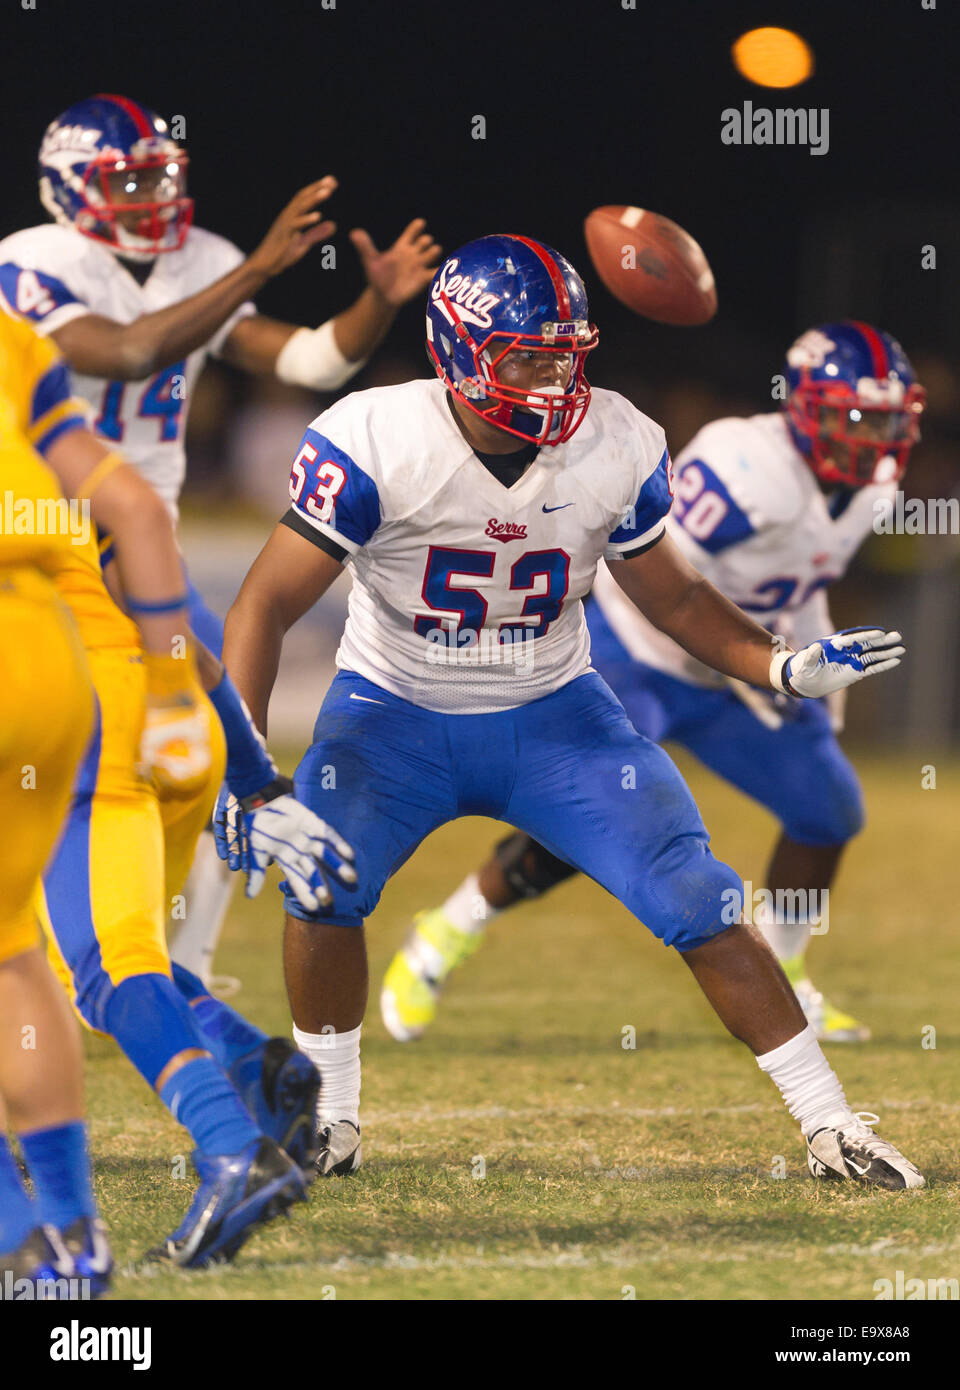 October 4, 2014, La Puente, CA.Gardena Serra cavaliers offenisve line (53) Steven Winn in action during the Bishop Amat upset of the Cavaliers at Bishop Amat high school on October 3, 2014. The Cavaliers who are usually a nationally ranked high school football team, were upset by Bishop Amat 14 - 7. (Mandatory Credit: Ed Ruvalcaba/MarinMedia.org) (Complete photographer, and company credit required) Stock Photo